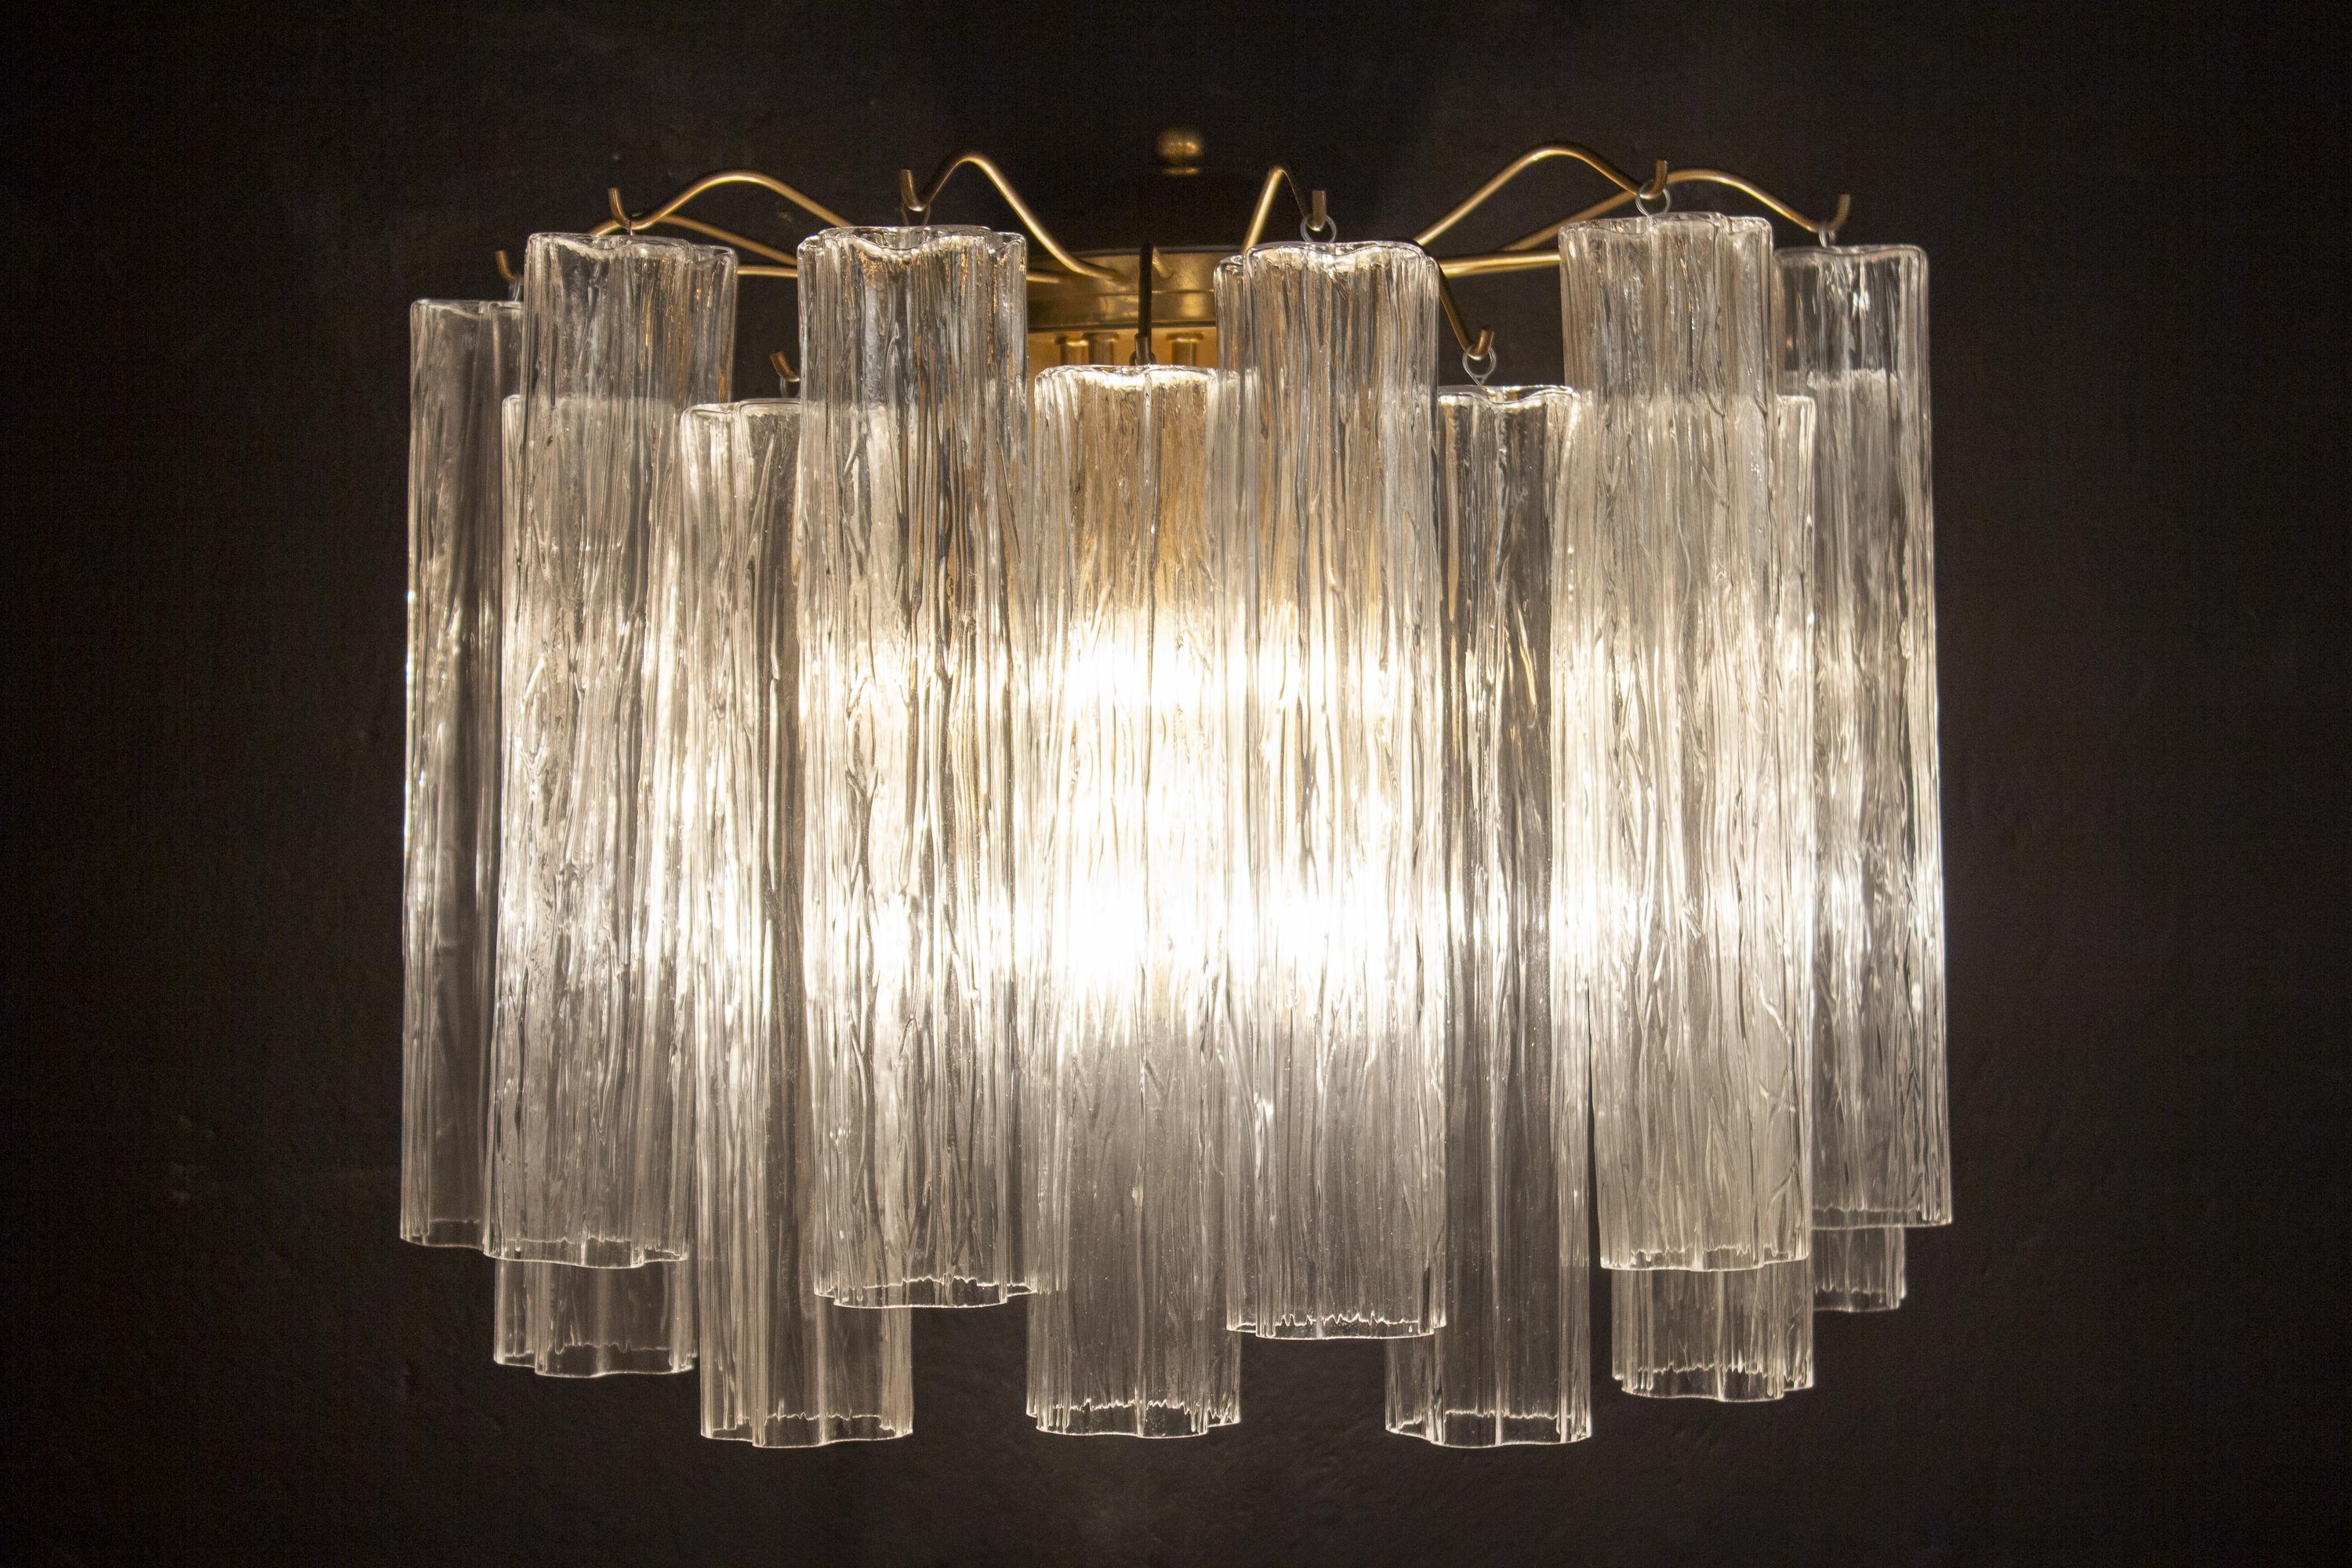 Pair of Monumental Italian Tronchi Chandeliers Murano, 1980s For Sale 12